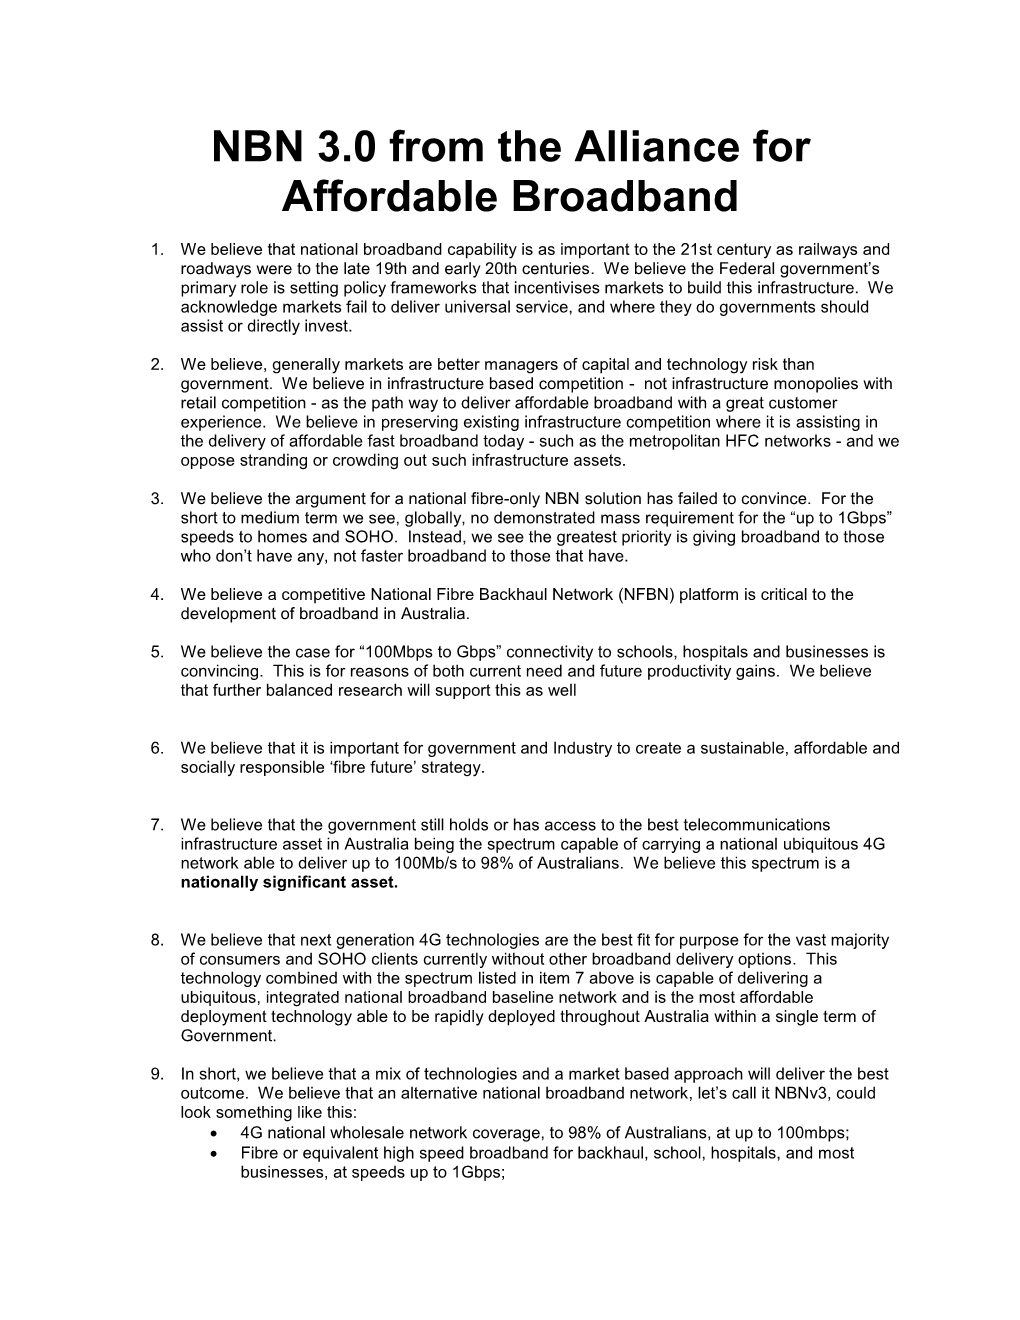 NBN 3.0 from the Alliance for Affordable Broadband